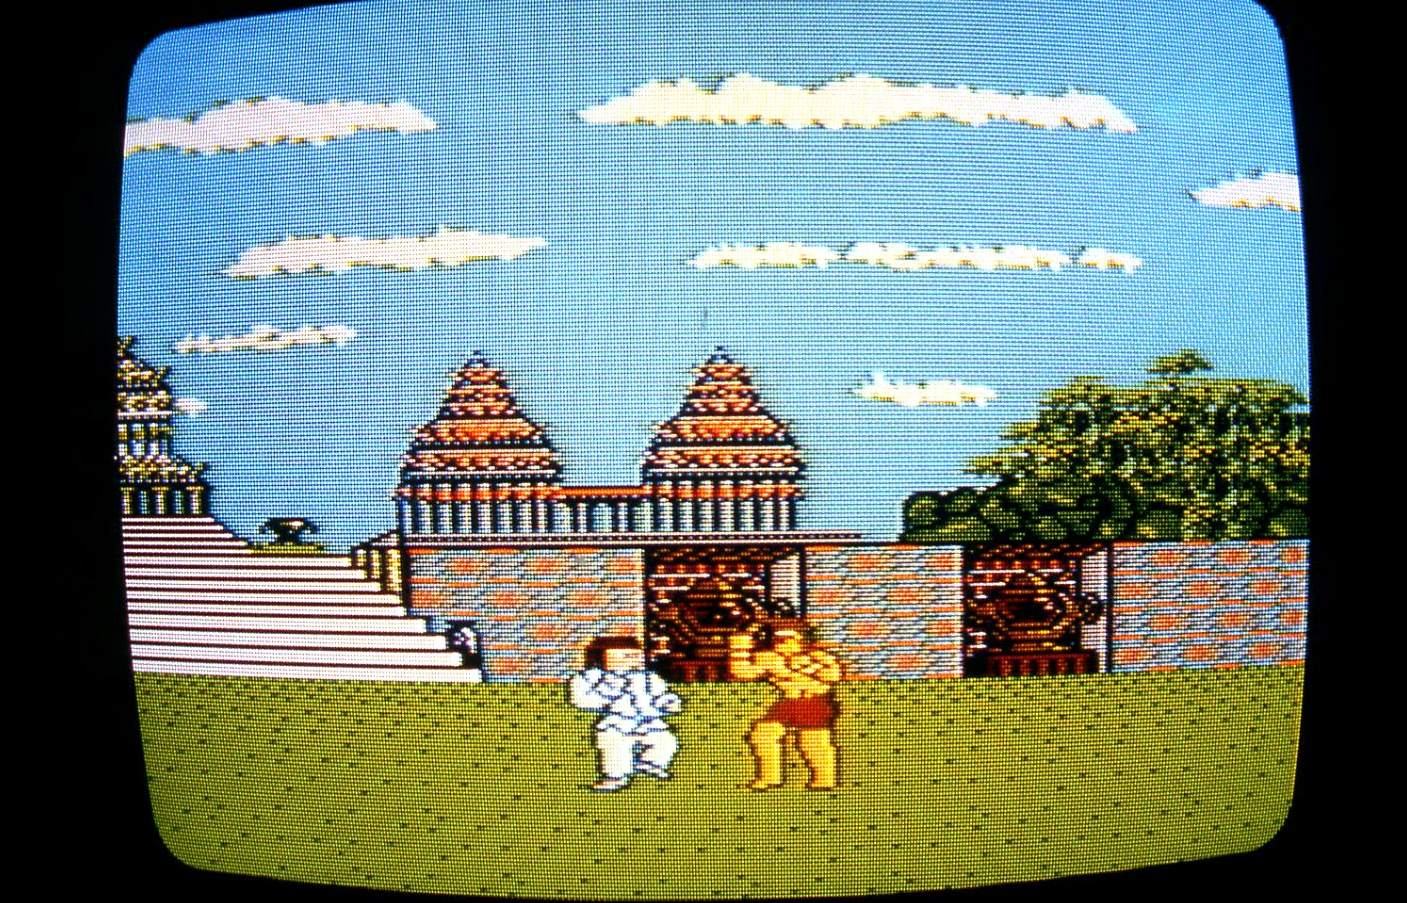 Street Fighter Was Almost Released For The 8-Bit NES